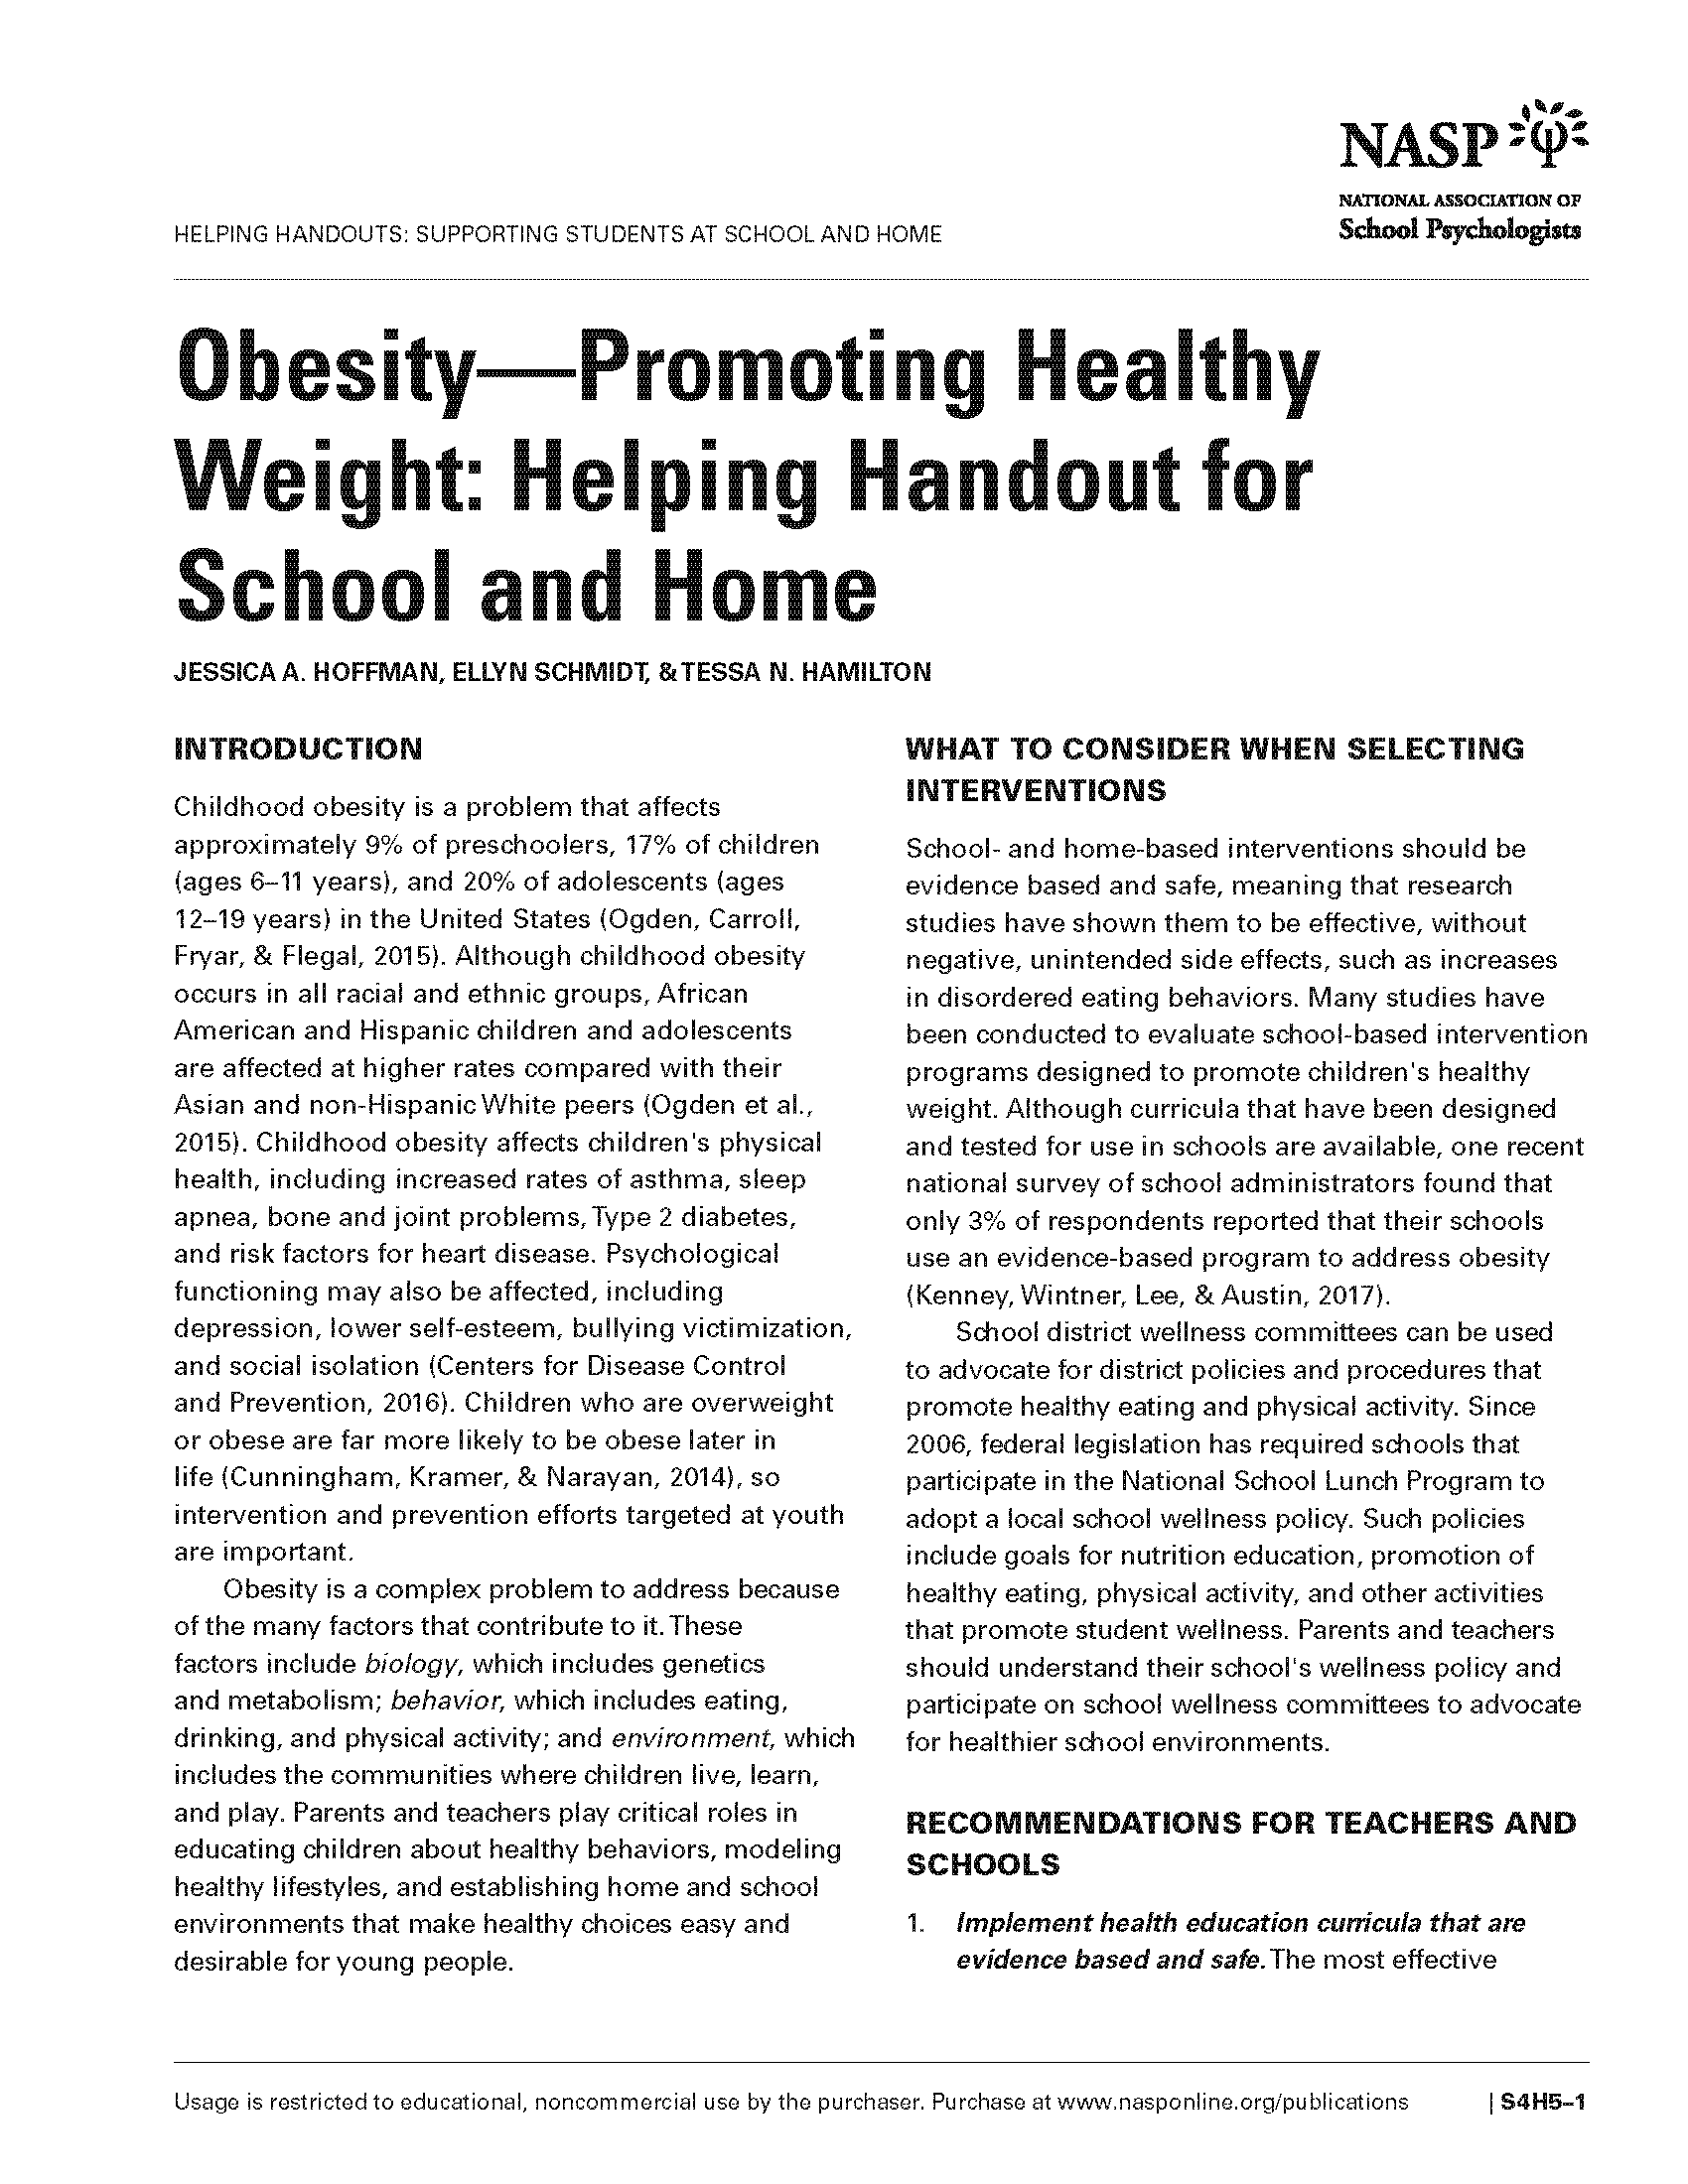 Obesity–Promoting Healthy Weight: Helping Handout for School and Home